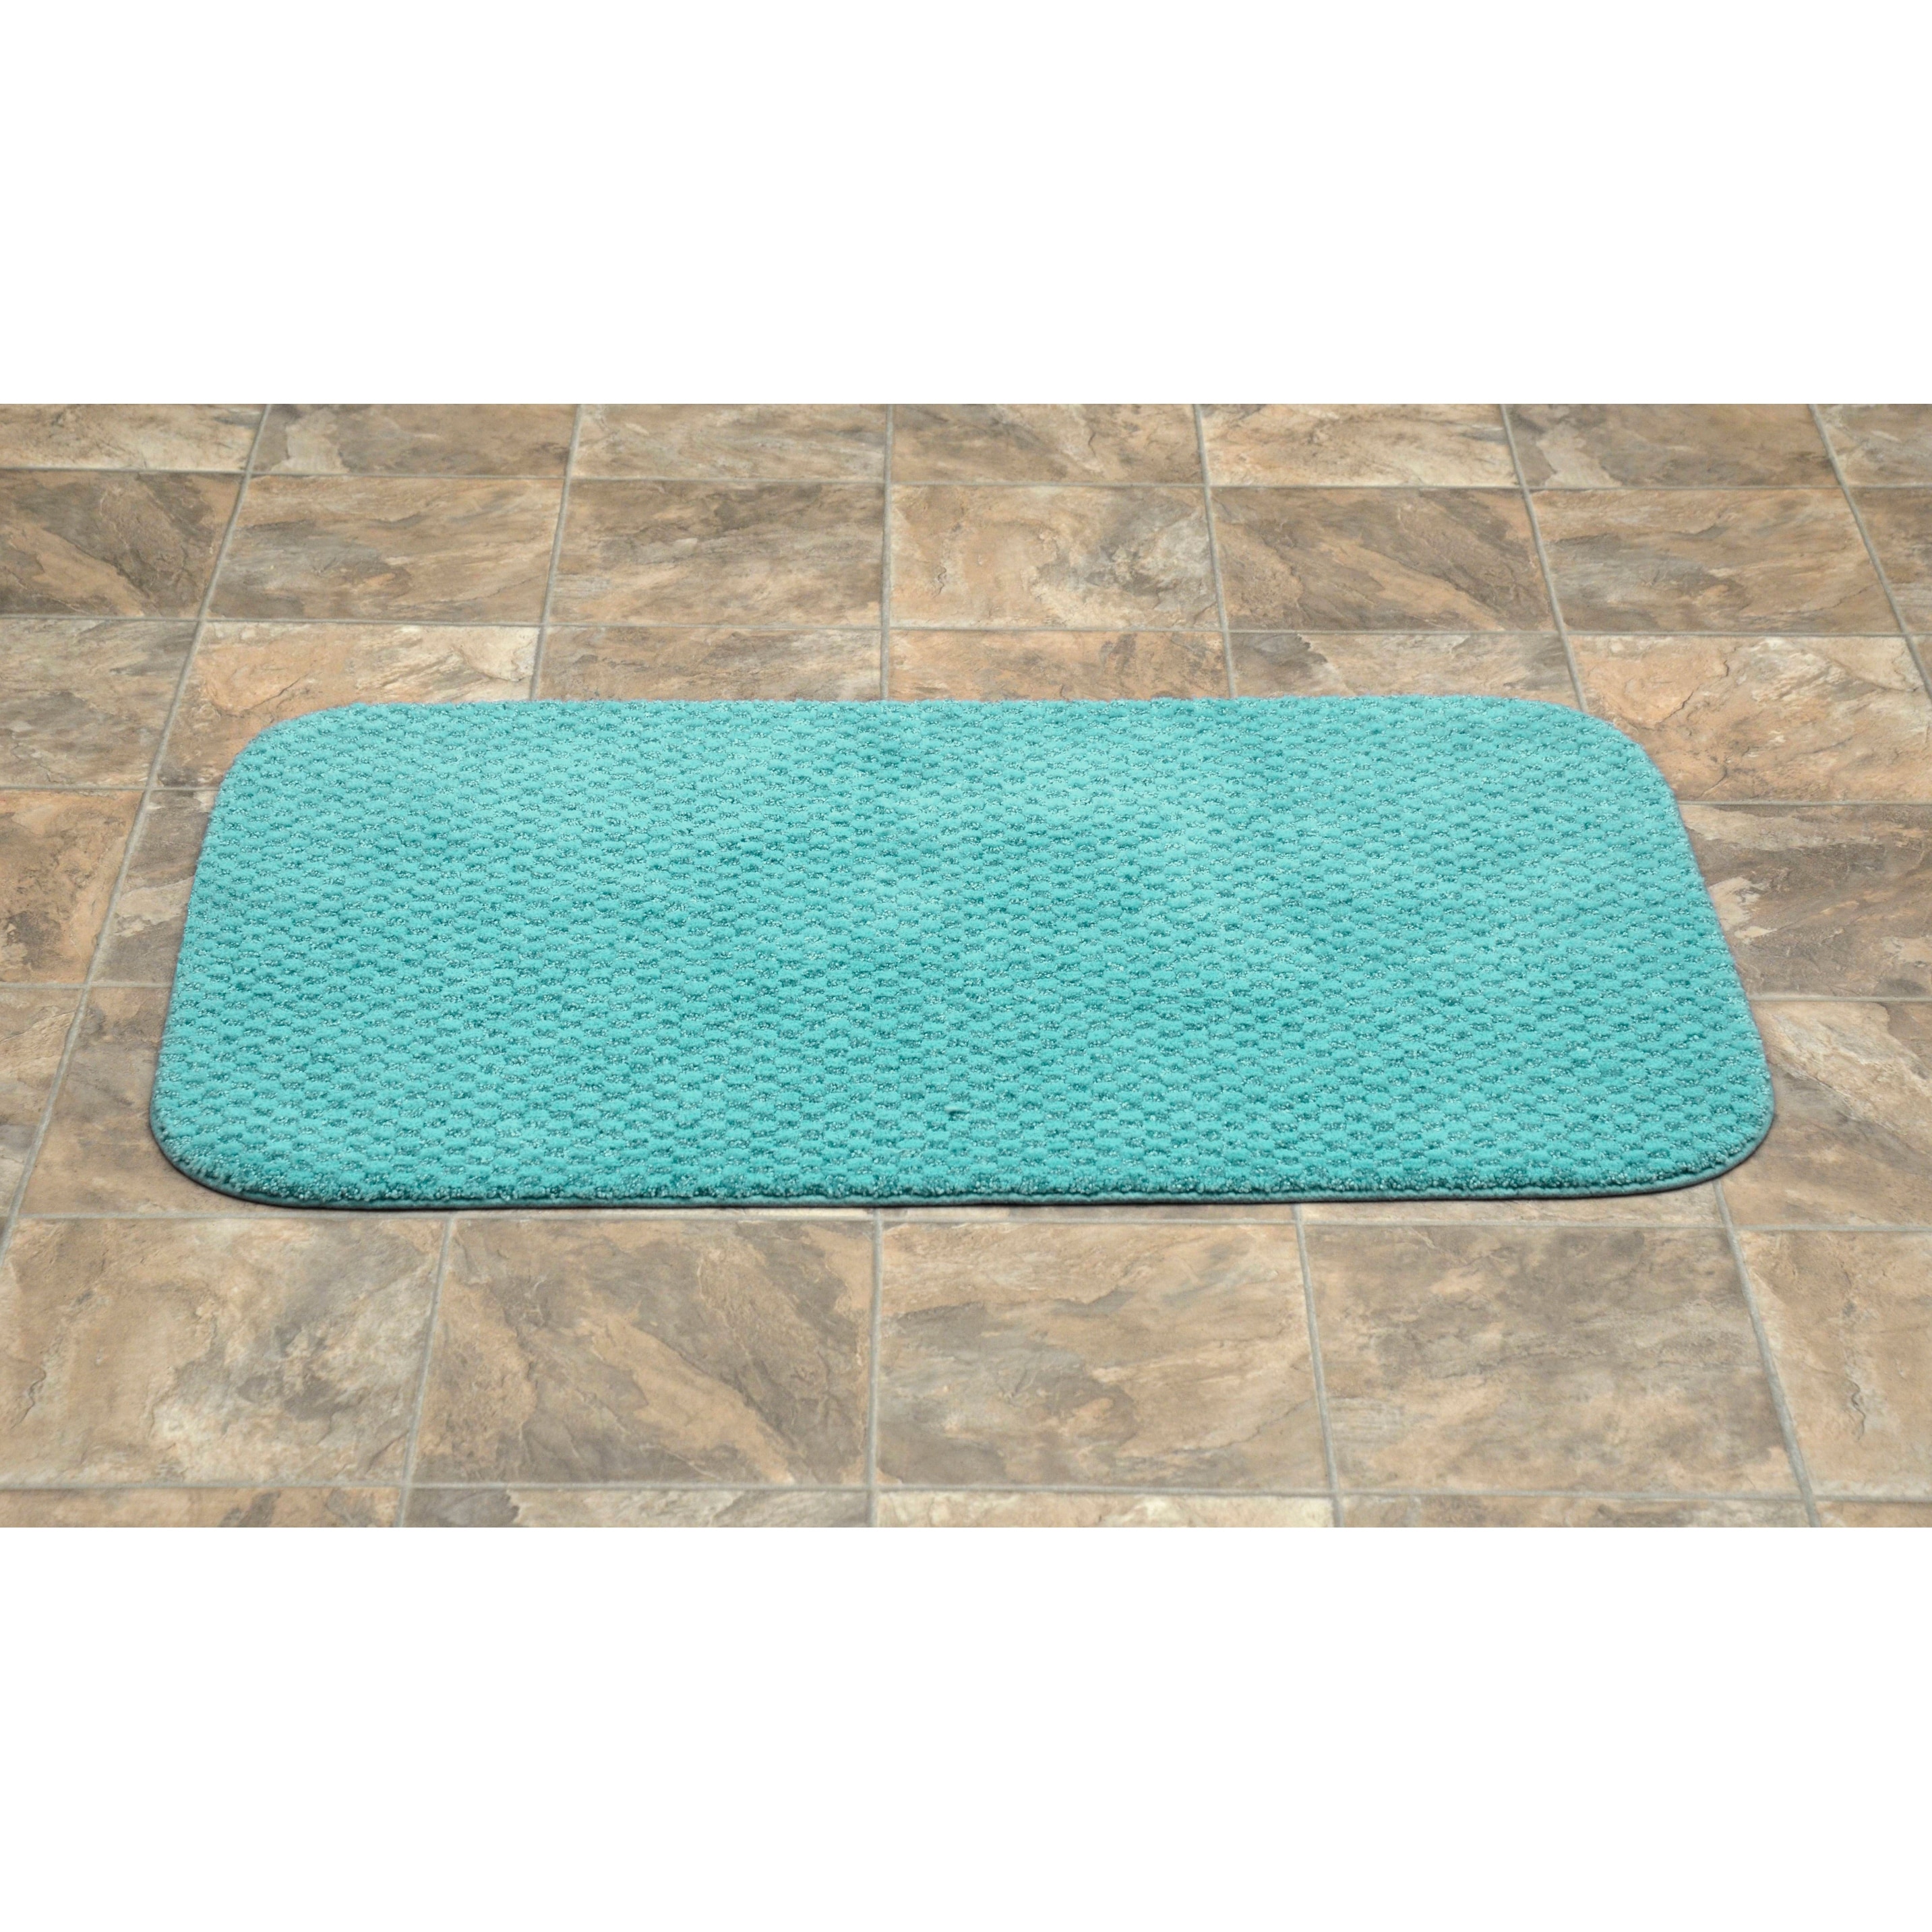 Mohawk Home Pure Perfection Turquoise 20 in. x 34 in. Nylon Bath Rug